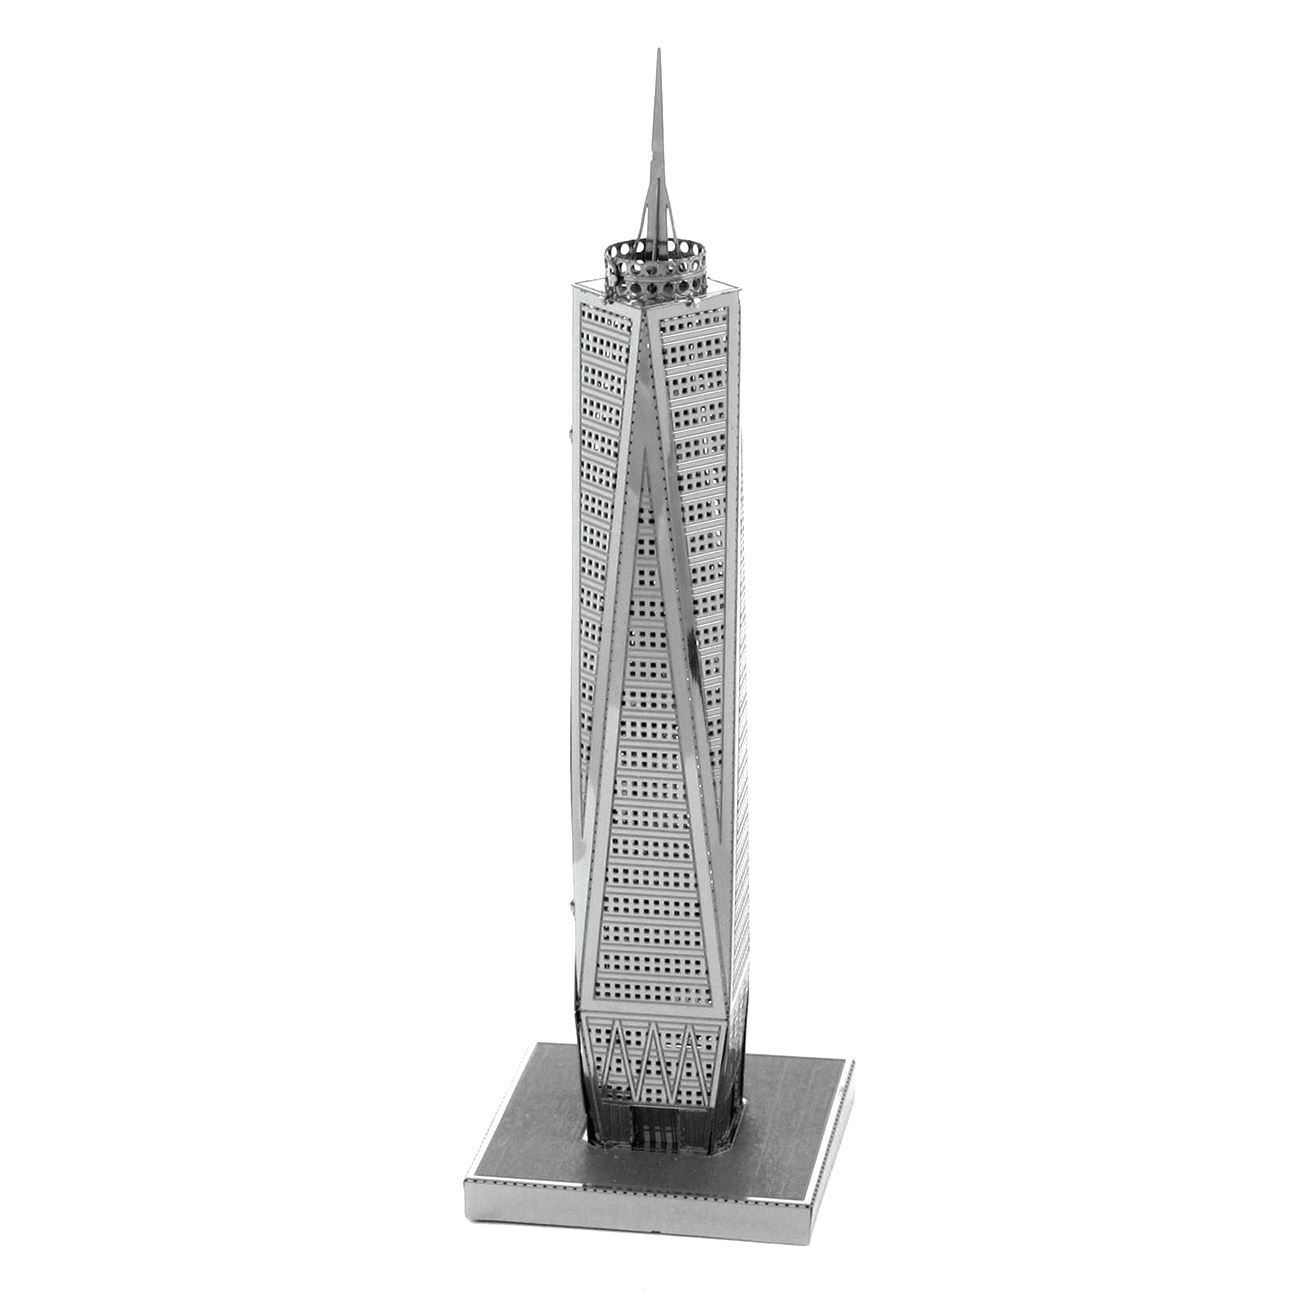 3D Metal Earth Model Kit Assembly New! One World Trade Center Building 